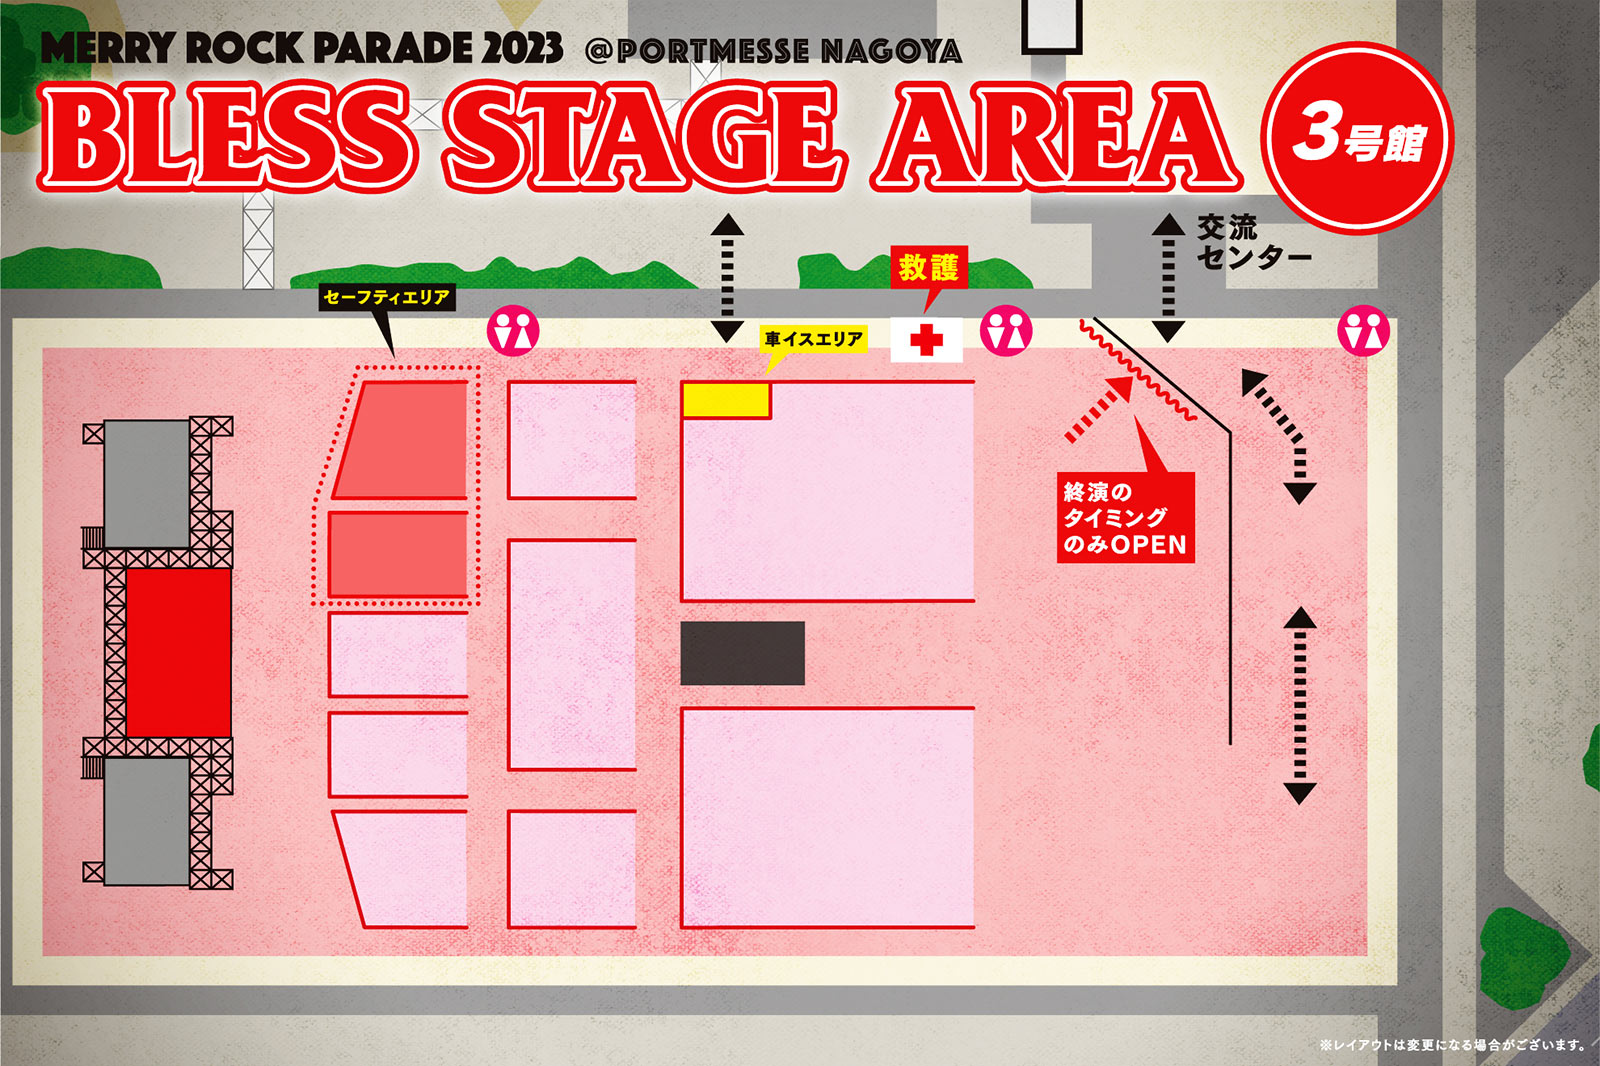 BLESS STAGE AREA